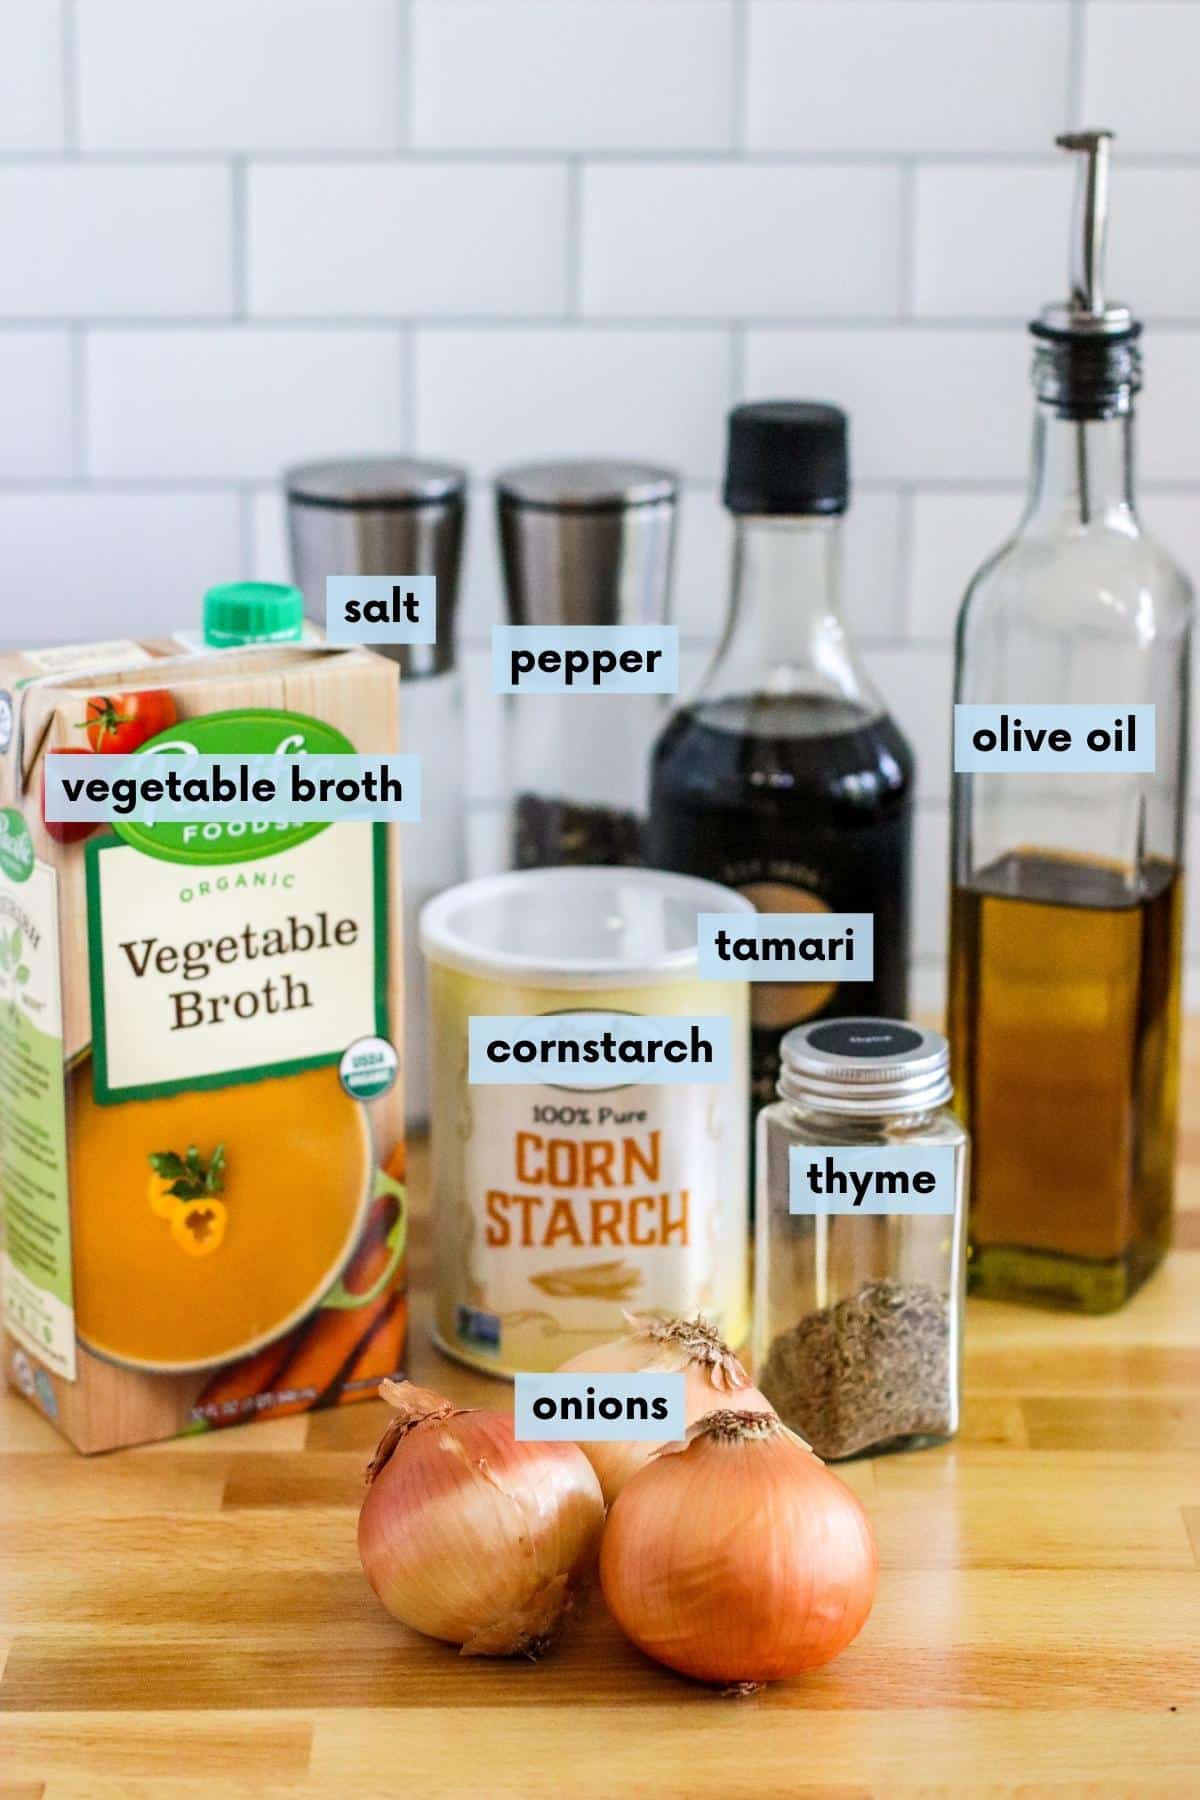 Box of vegetable broth, container of cornstarch, yellow onions, dried thyme, bottle of tamari, bottle of olive oil, and salt and pepper grinders.